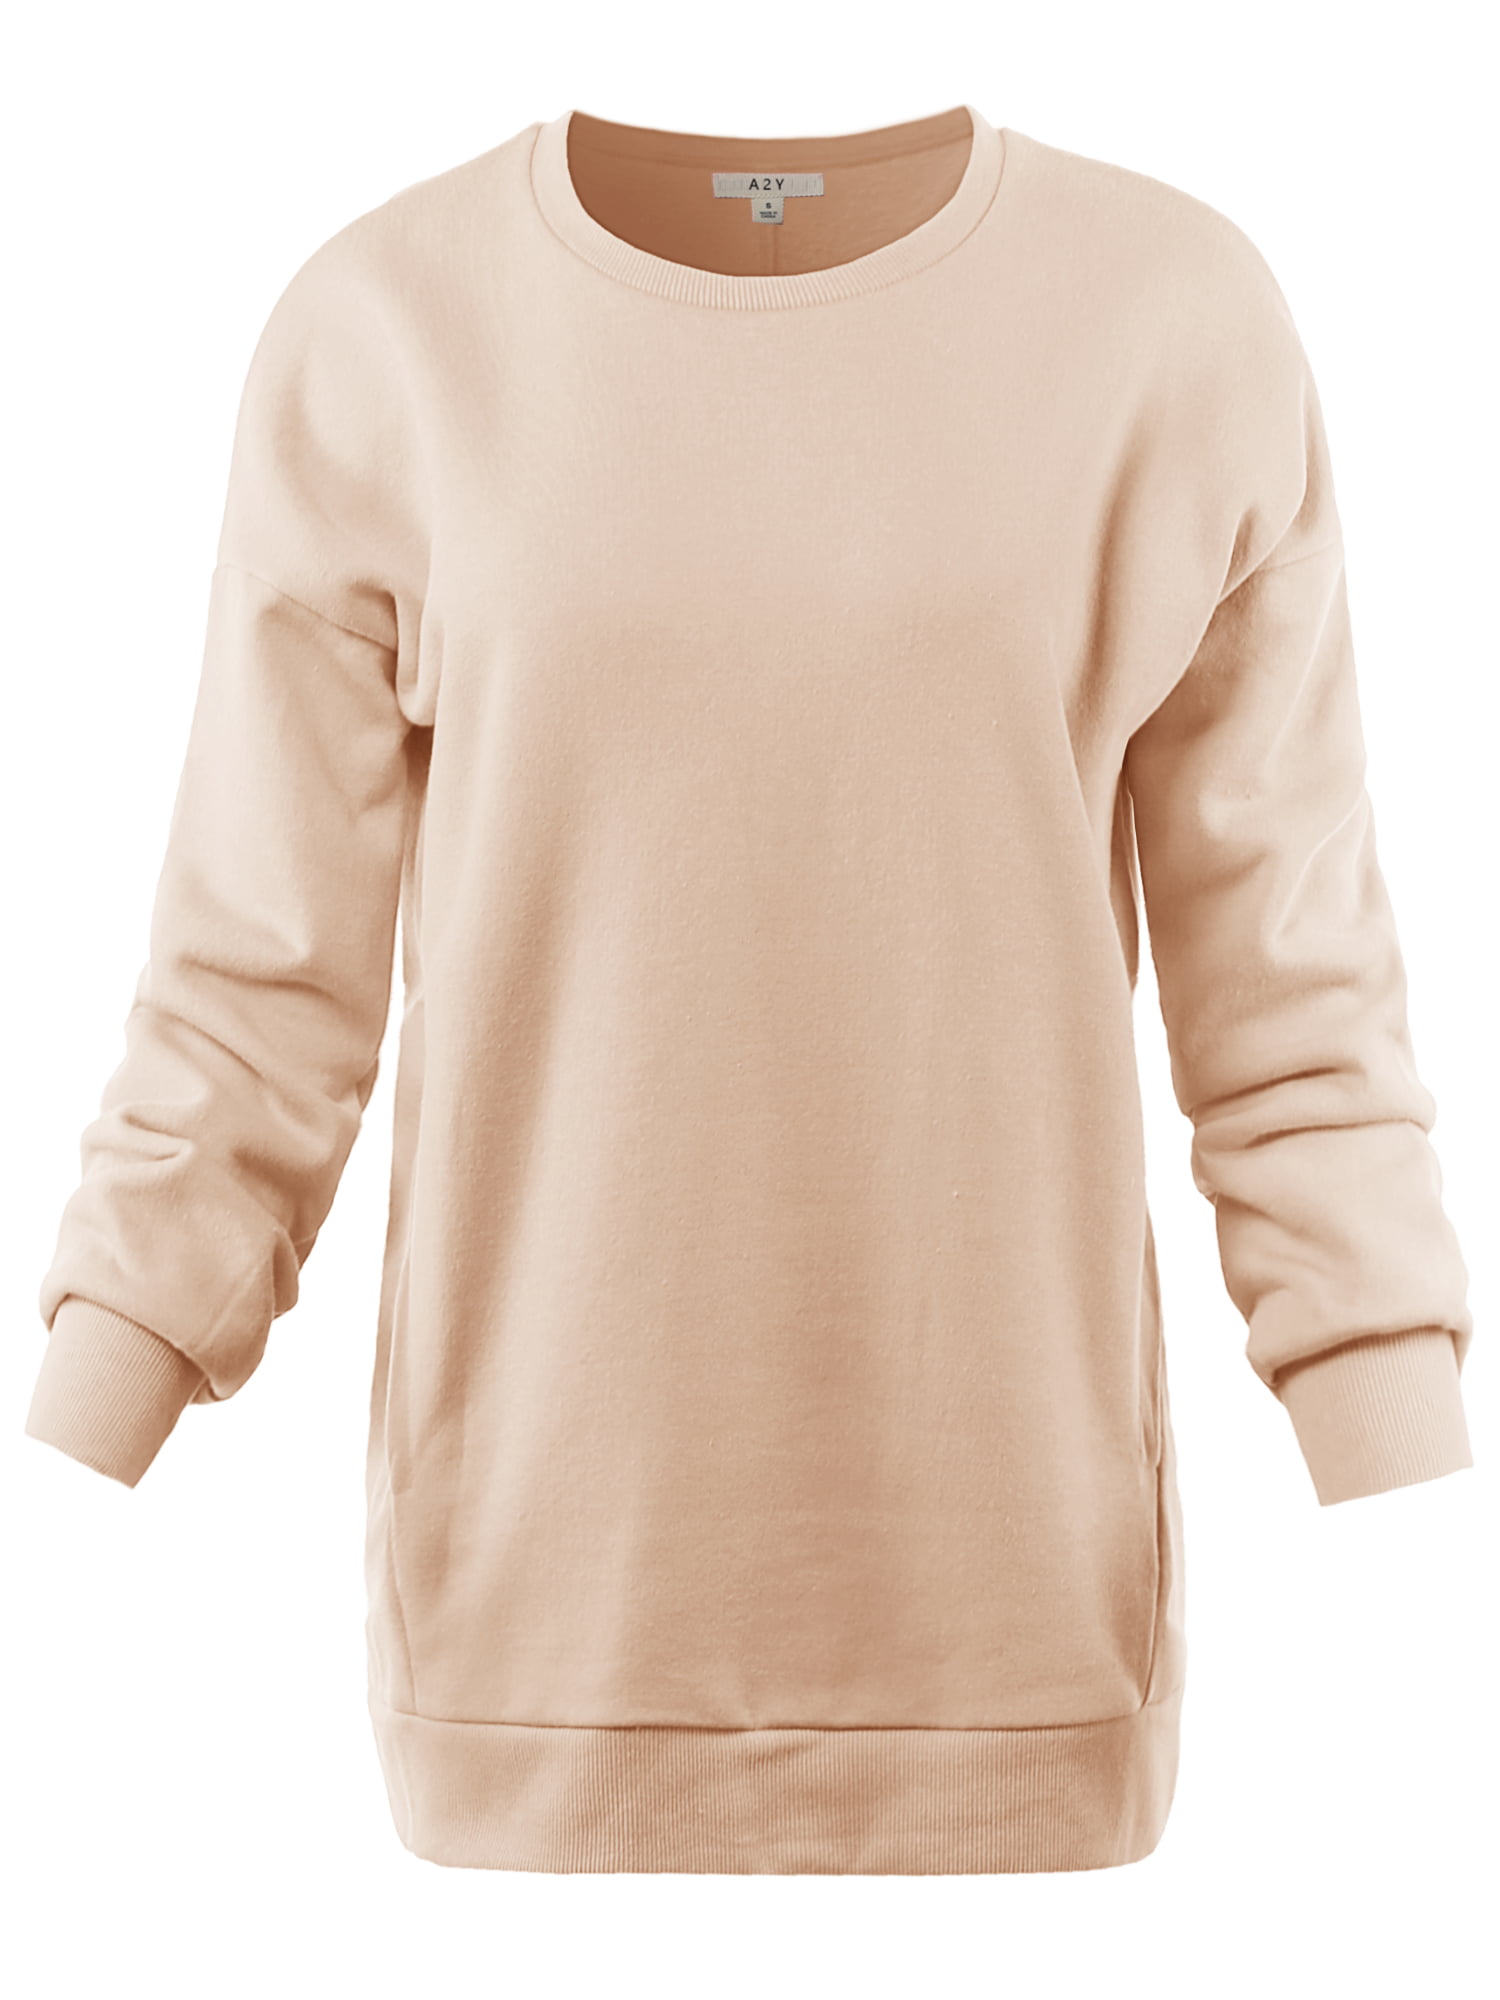 A2Y Womens Relaxed Fit Long Sleeve Crew Neck Side Pocket Sweatshirt 